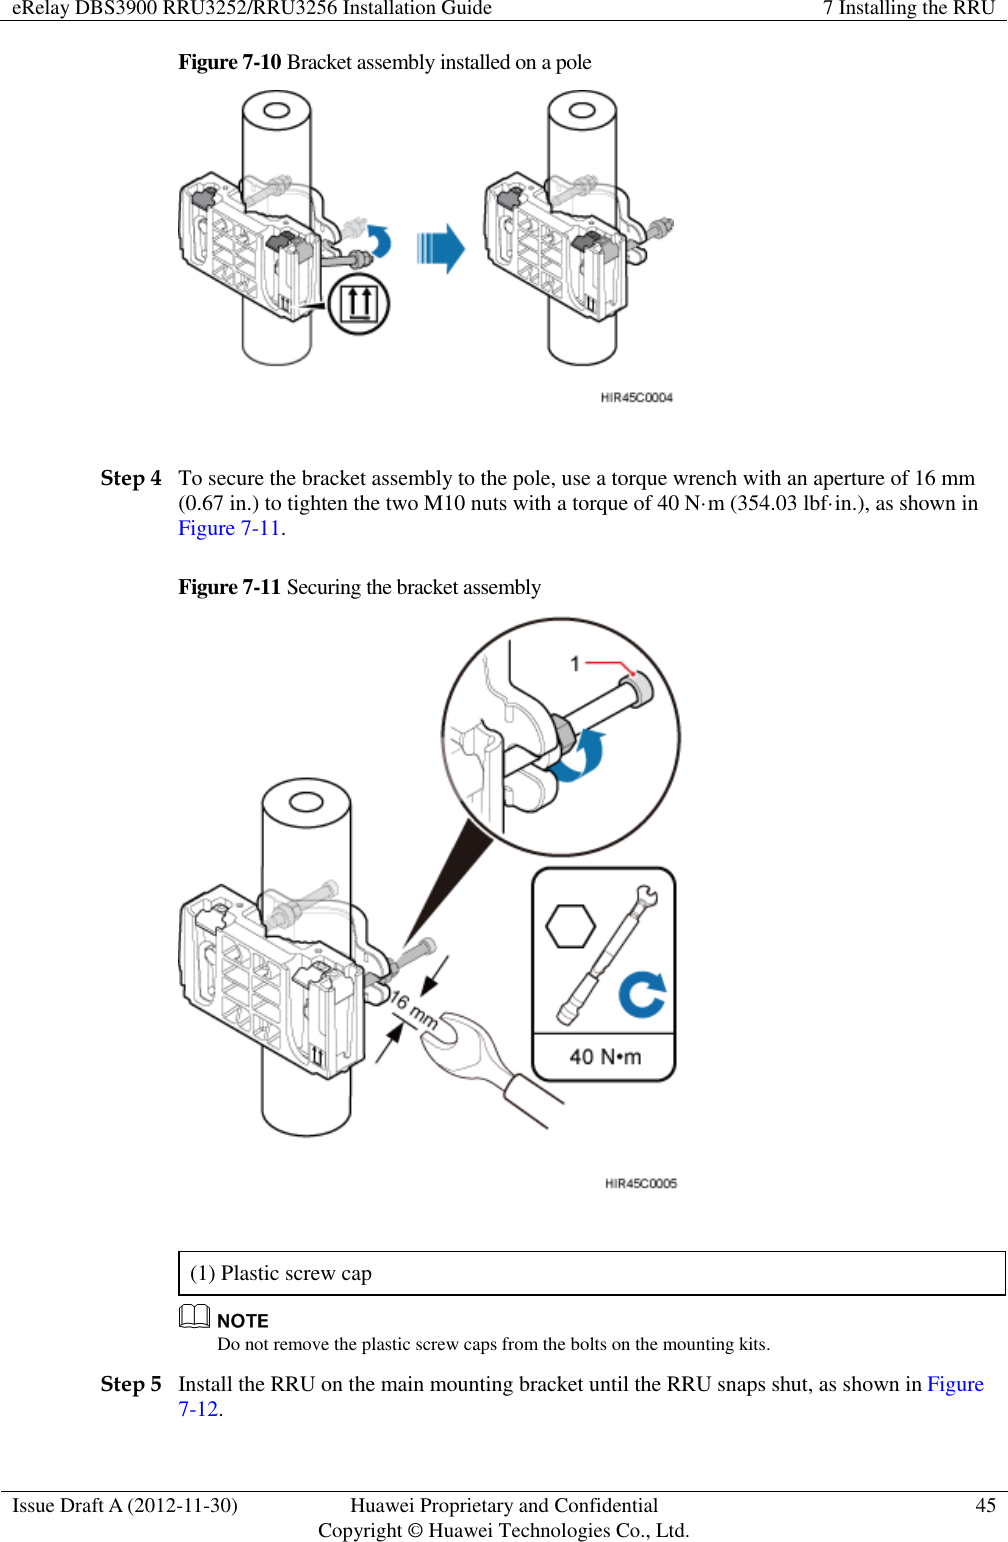 eRelay DBS3900 RRU3252/RRU3256 Installation Guide 7 Installing the RRU  Issue Draft A (2012-11-30) Huawei Proprietary and Confidential                                     Copyright © Huawei Technologies Co., Ltd. 45  Figure 7-10 Bracket assembly installed on a pole   Step 4 To secure the bracket assembly to the pole, use a torque wrench with an aperture of 16 mm (0.67 in.) to tighten the two M10 nuts with a torque of 40 N·m (354.03 lbf·in.), as shown in Figure 7-11.   Figure 7-11 Securing the bracket assembly   (1) Plastic screw cap  Do not remove the plastic screw caps from the bolts on the mounting kits.   Step 5 Install the RRU on the main mounting bracket until the RRU snaps shut, as shown in Figure 7-12. 